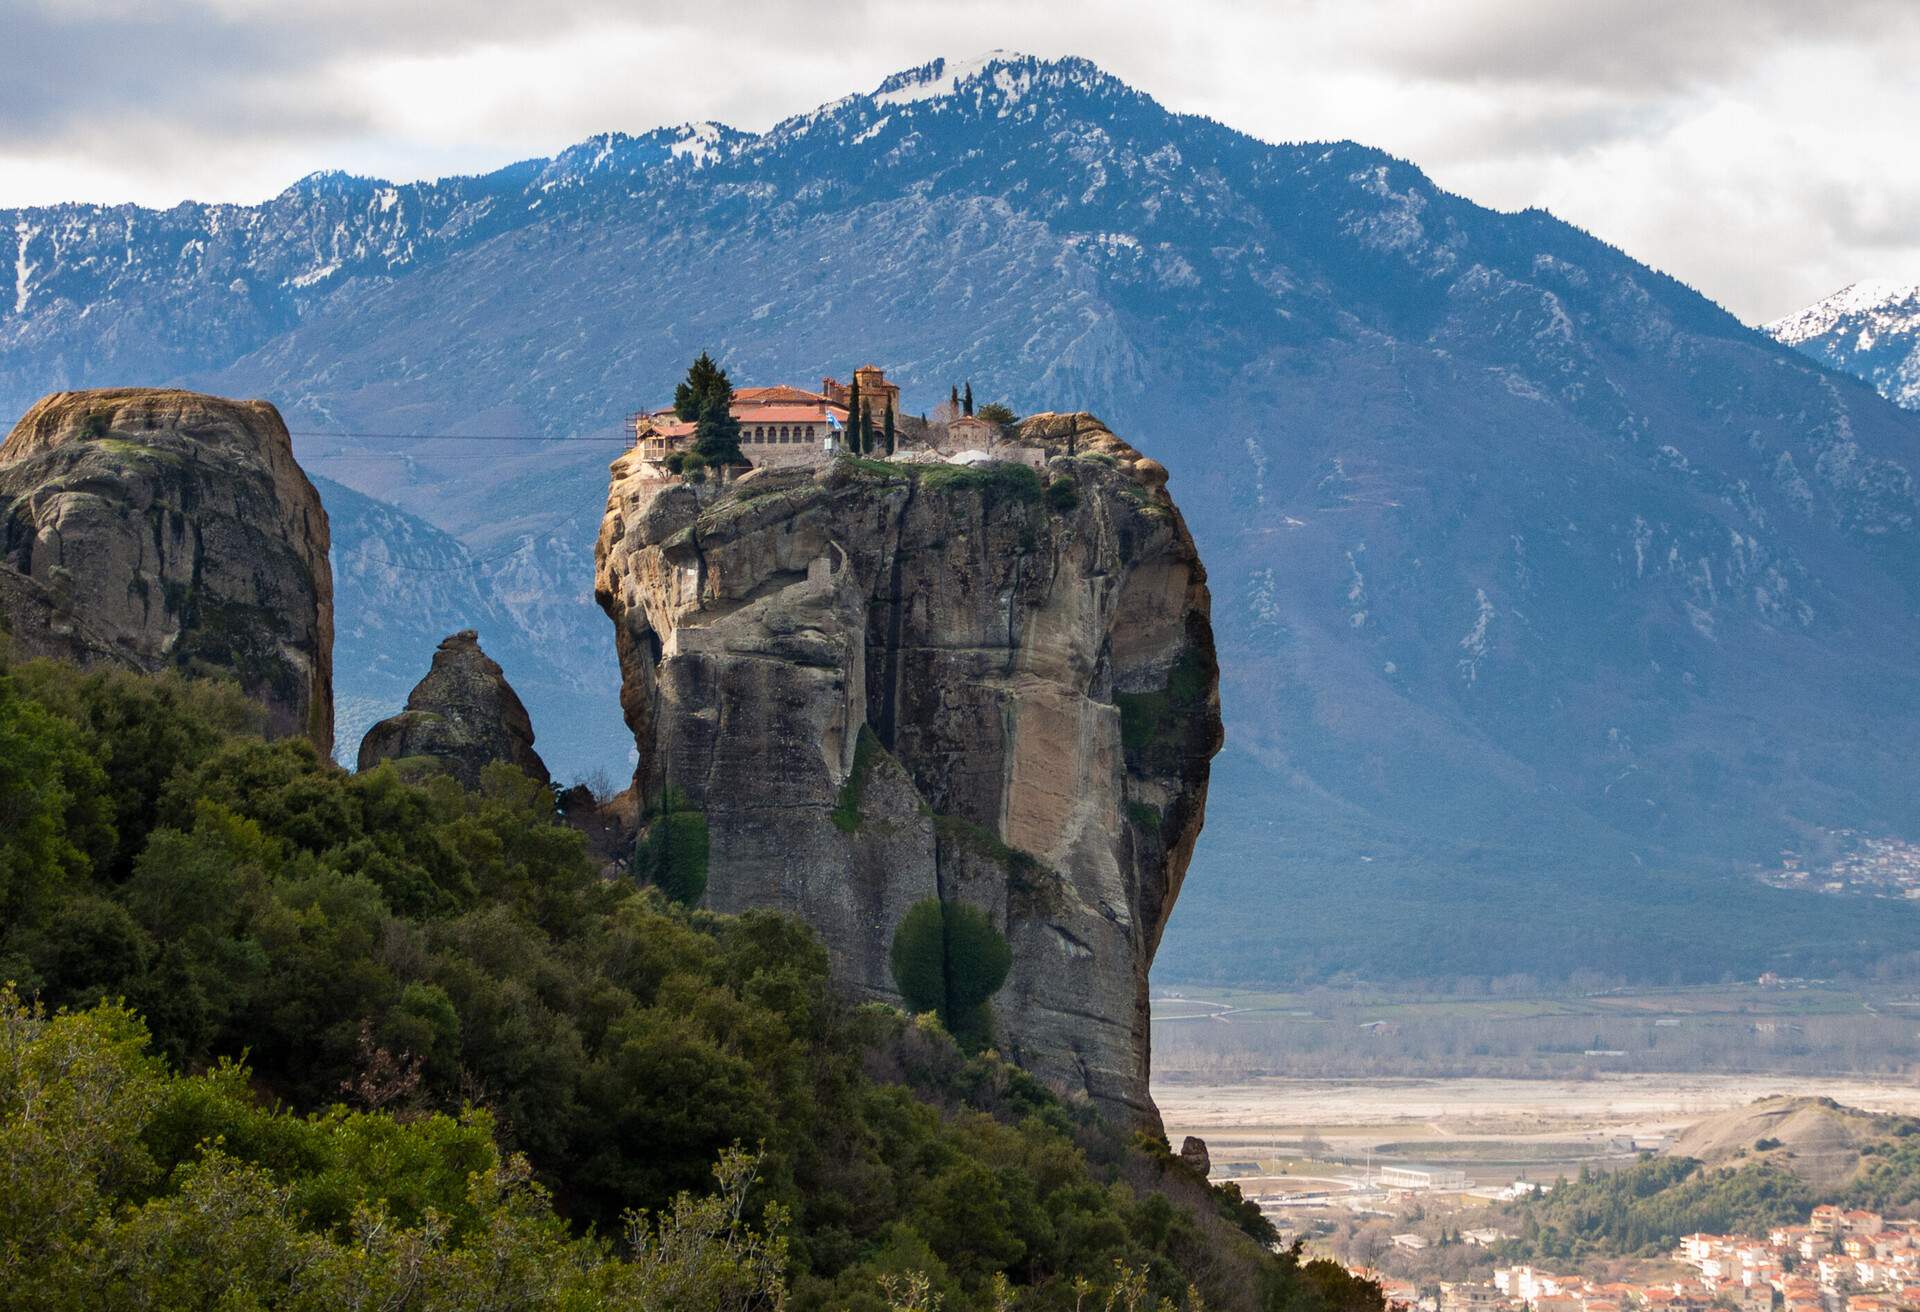 A monastery on top of a steep rock formation against the backdrop of snow-capped mountains.